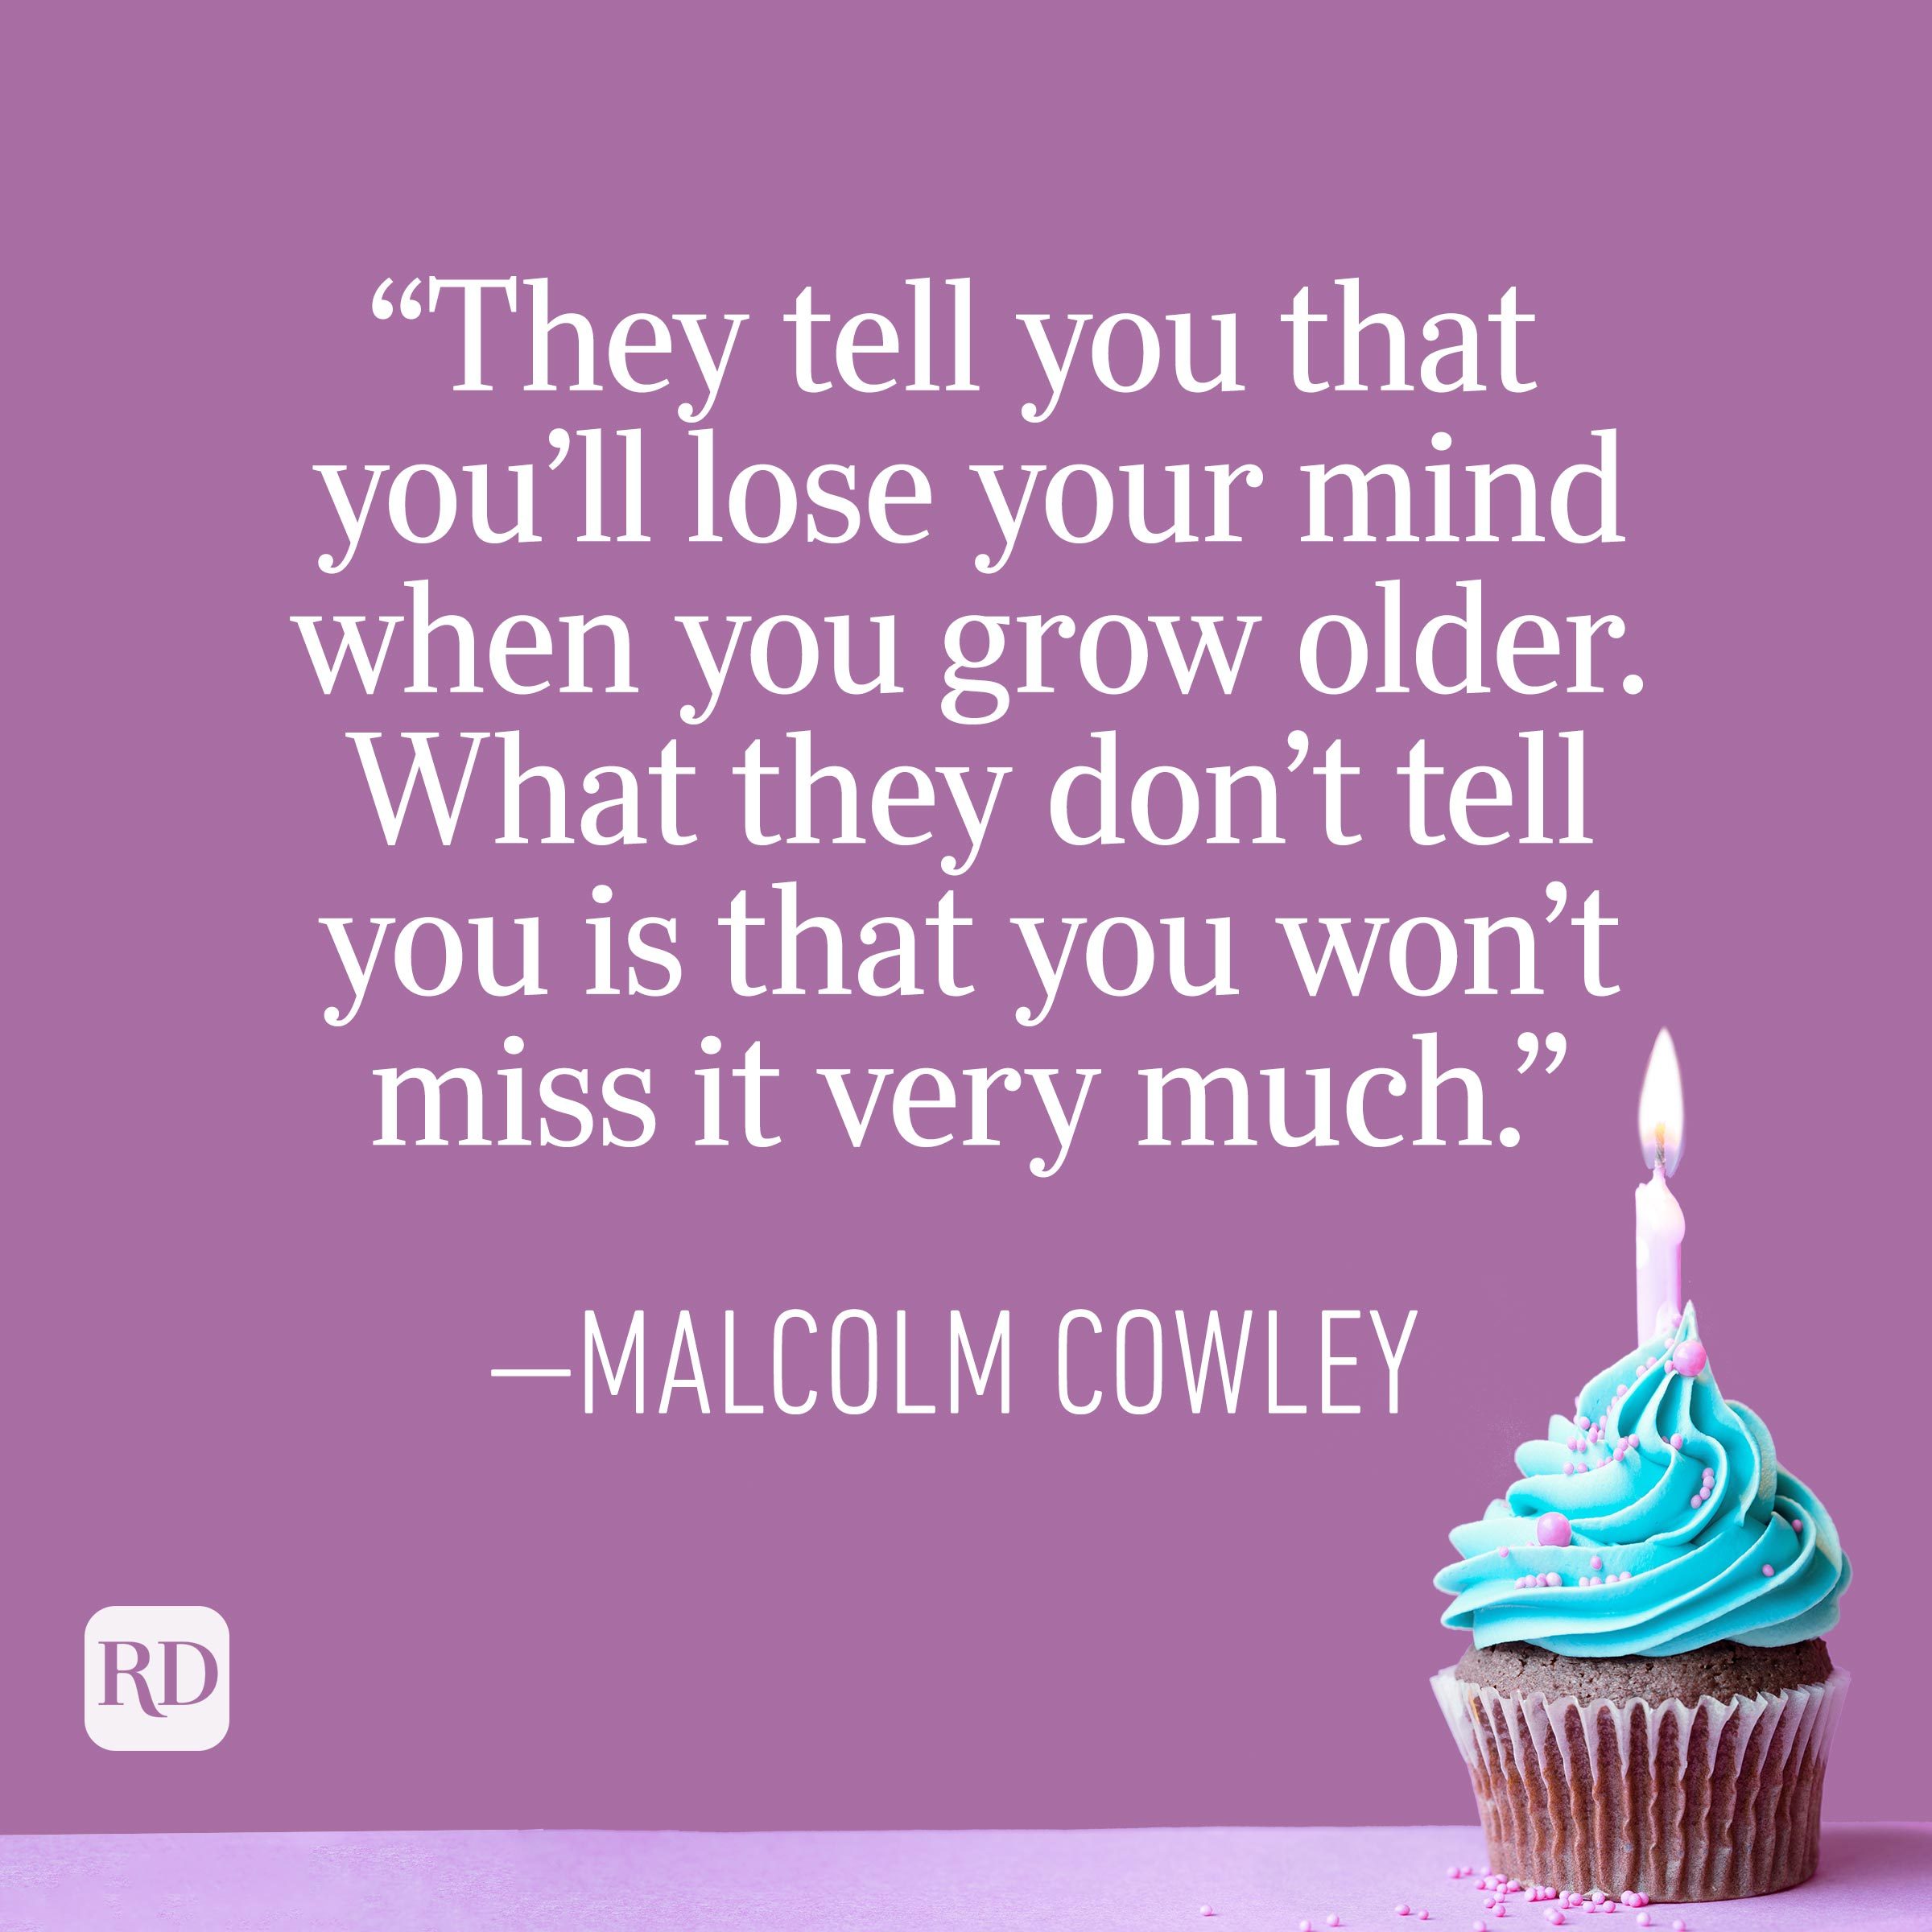 "They tell you that you'll lose your mind when you grow older. What they don't tell you is that you won't miss it very much." —Malcolm Cowley